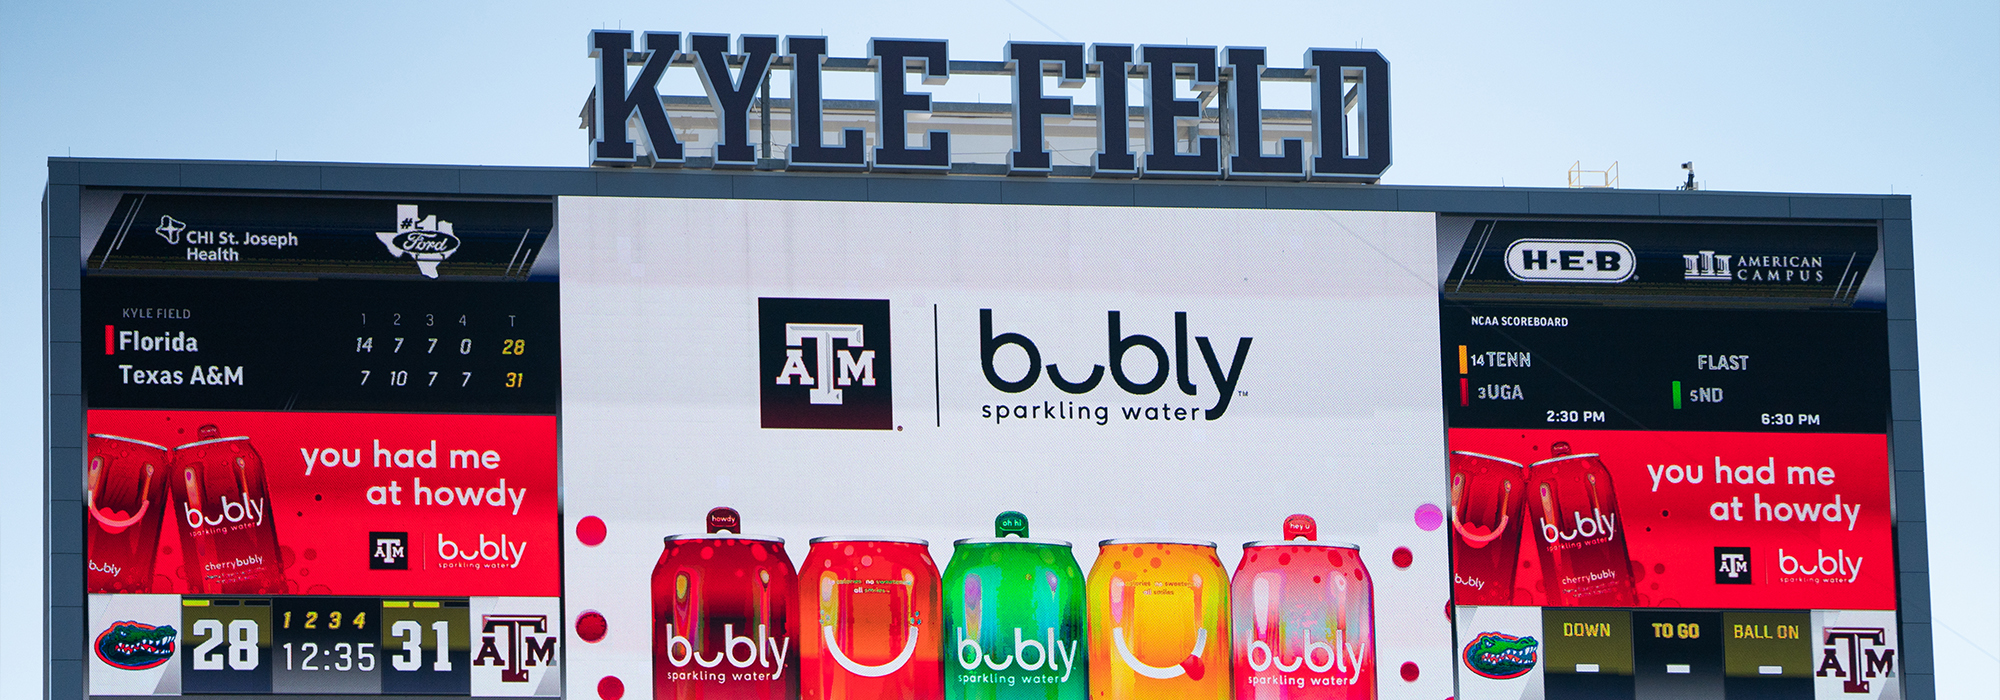 Bubly Howdy tab promotion on Kyle Field score board